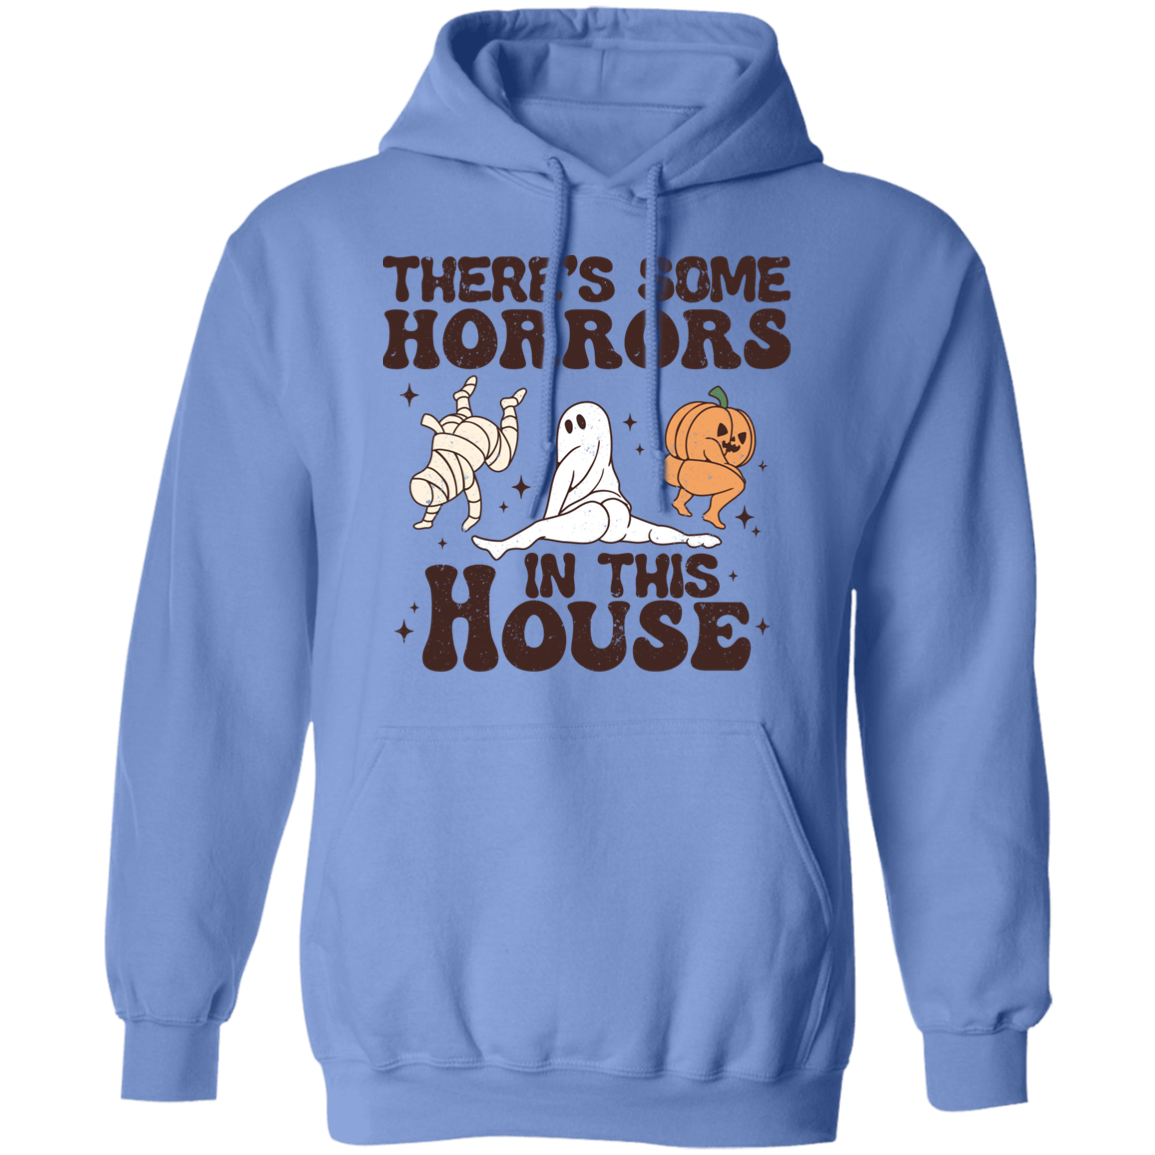 There's Some Horrors in this House Pullover Hoodie